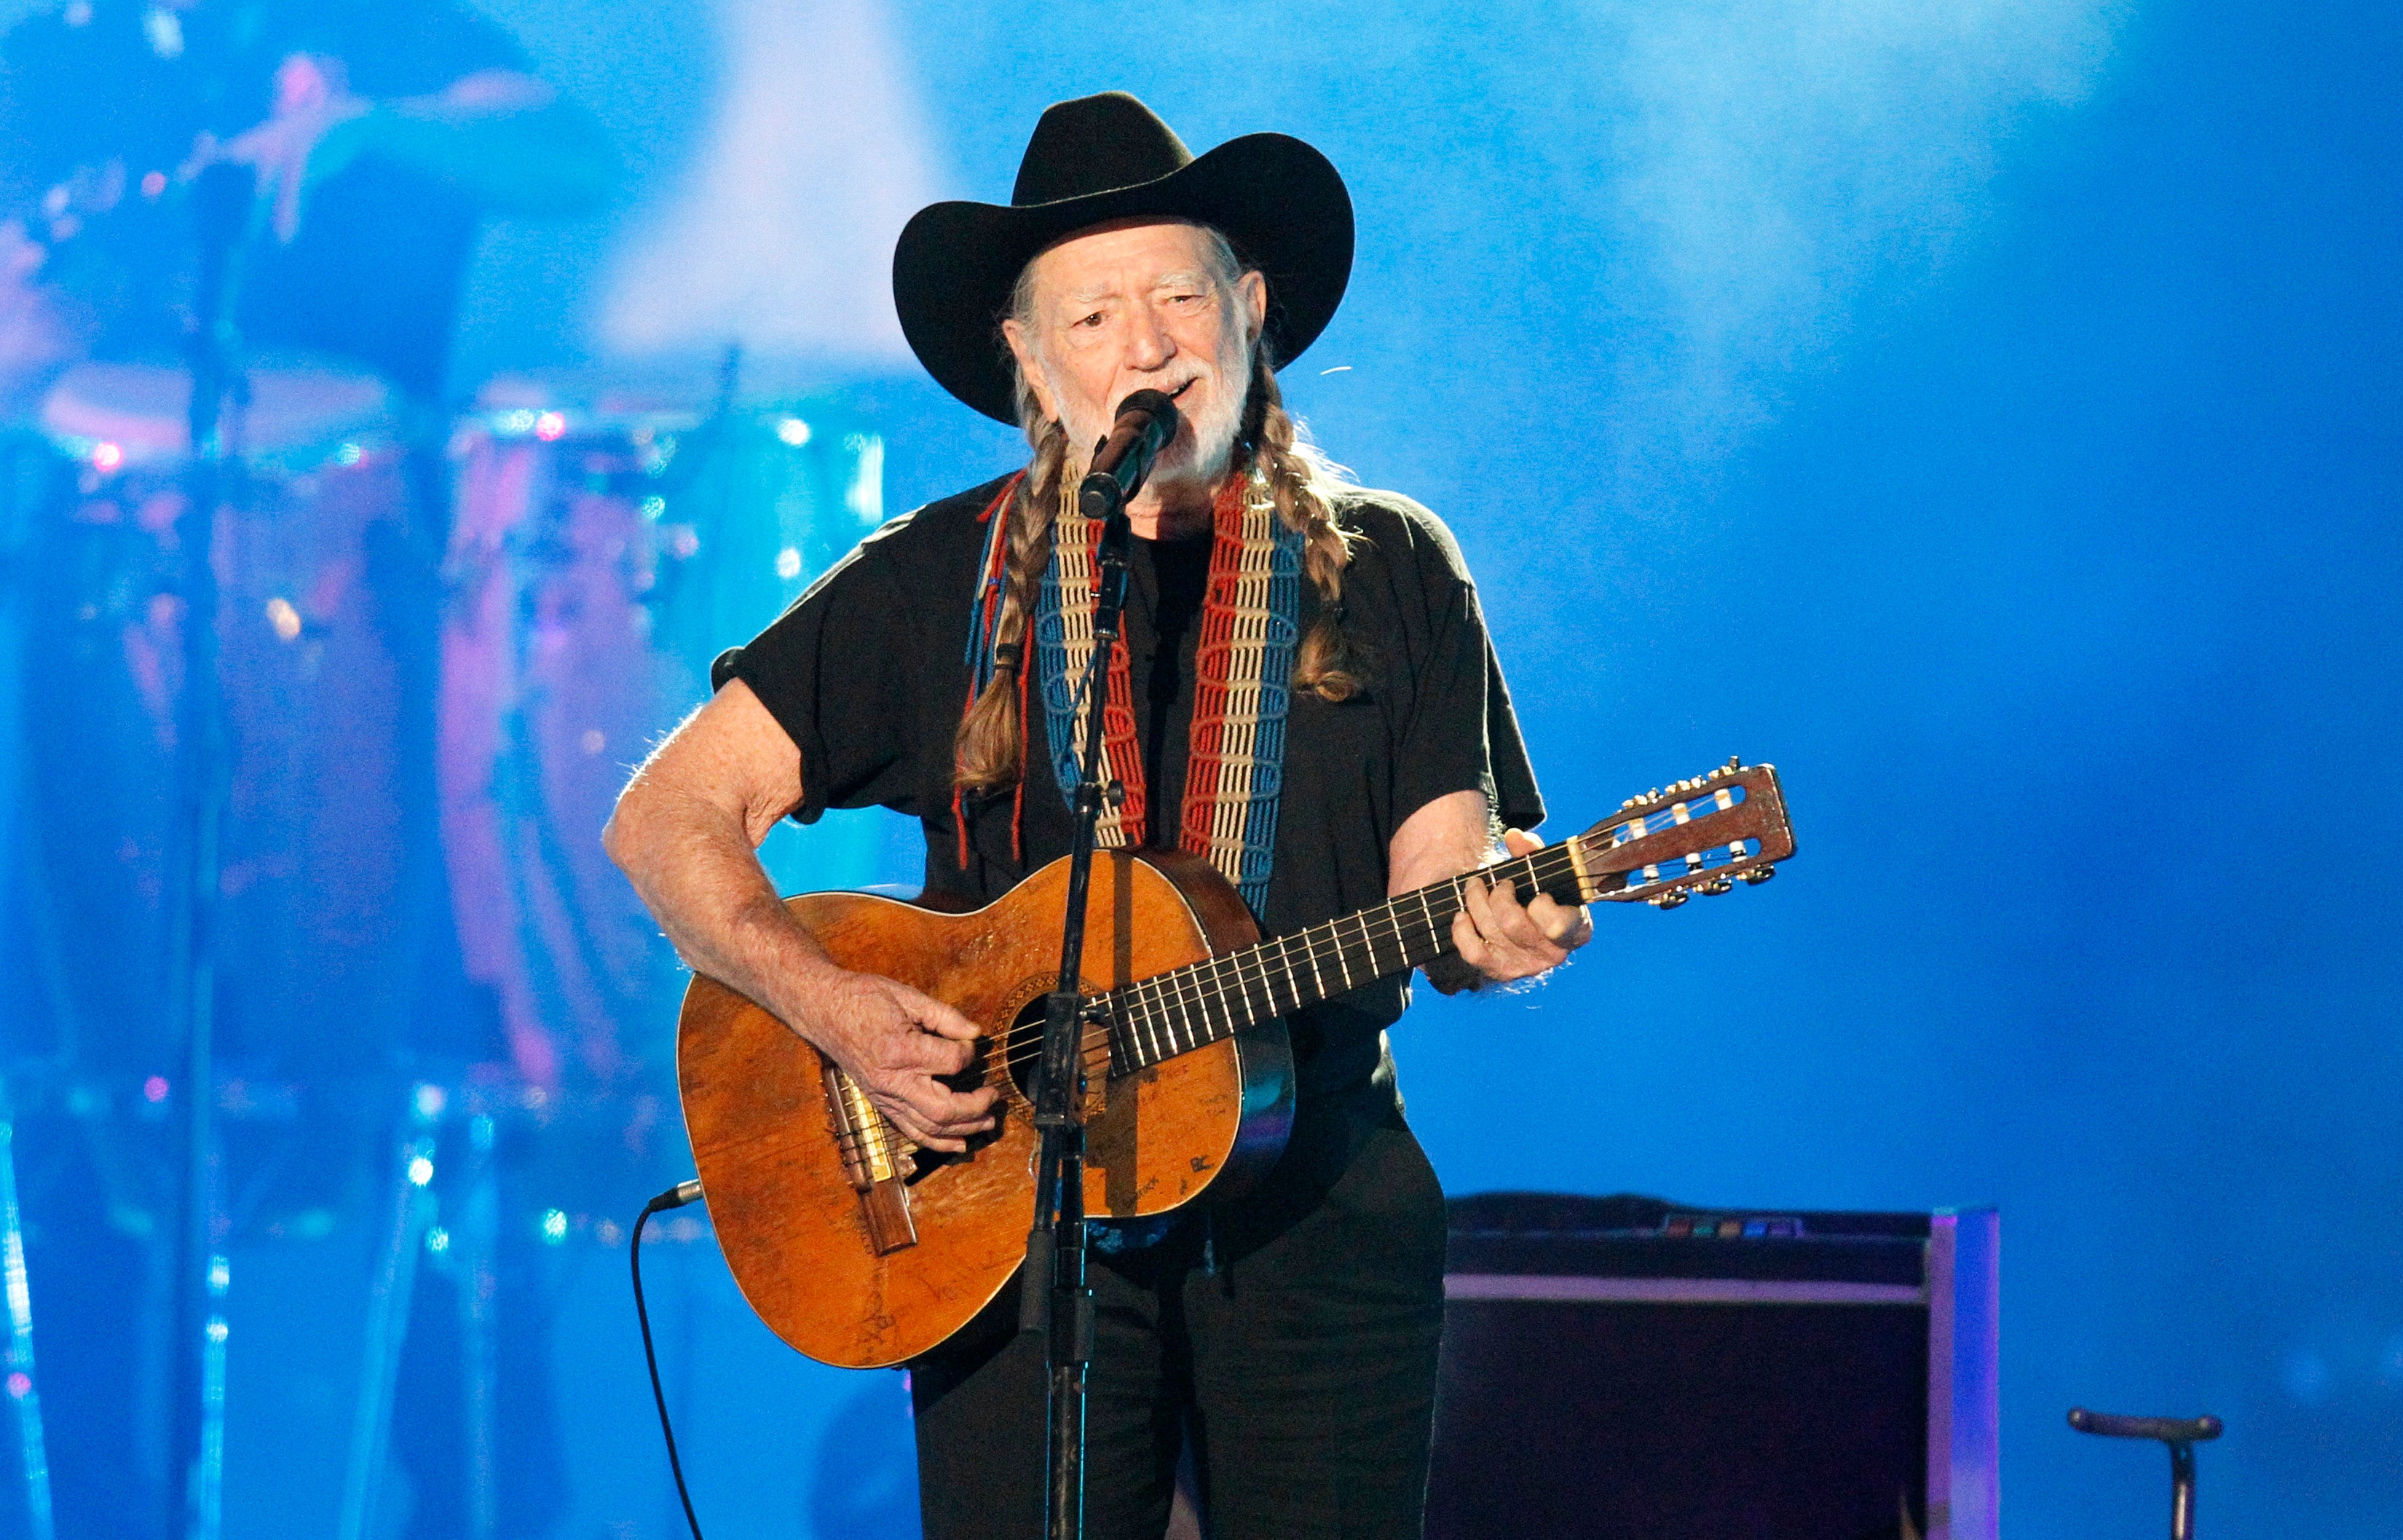 Toy armadillo stolen in New York after Willie Nelson concert | Fox News3300 x 2115